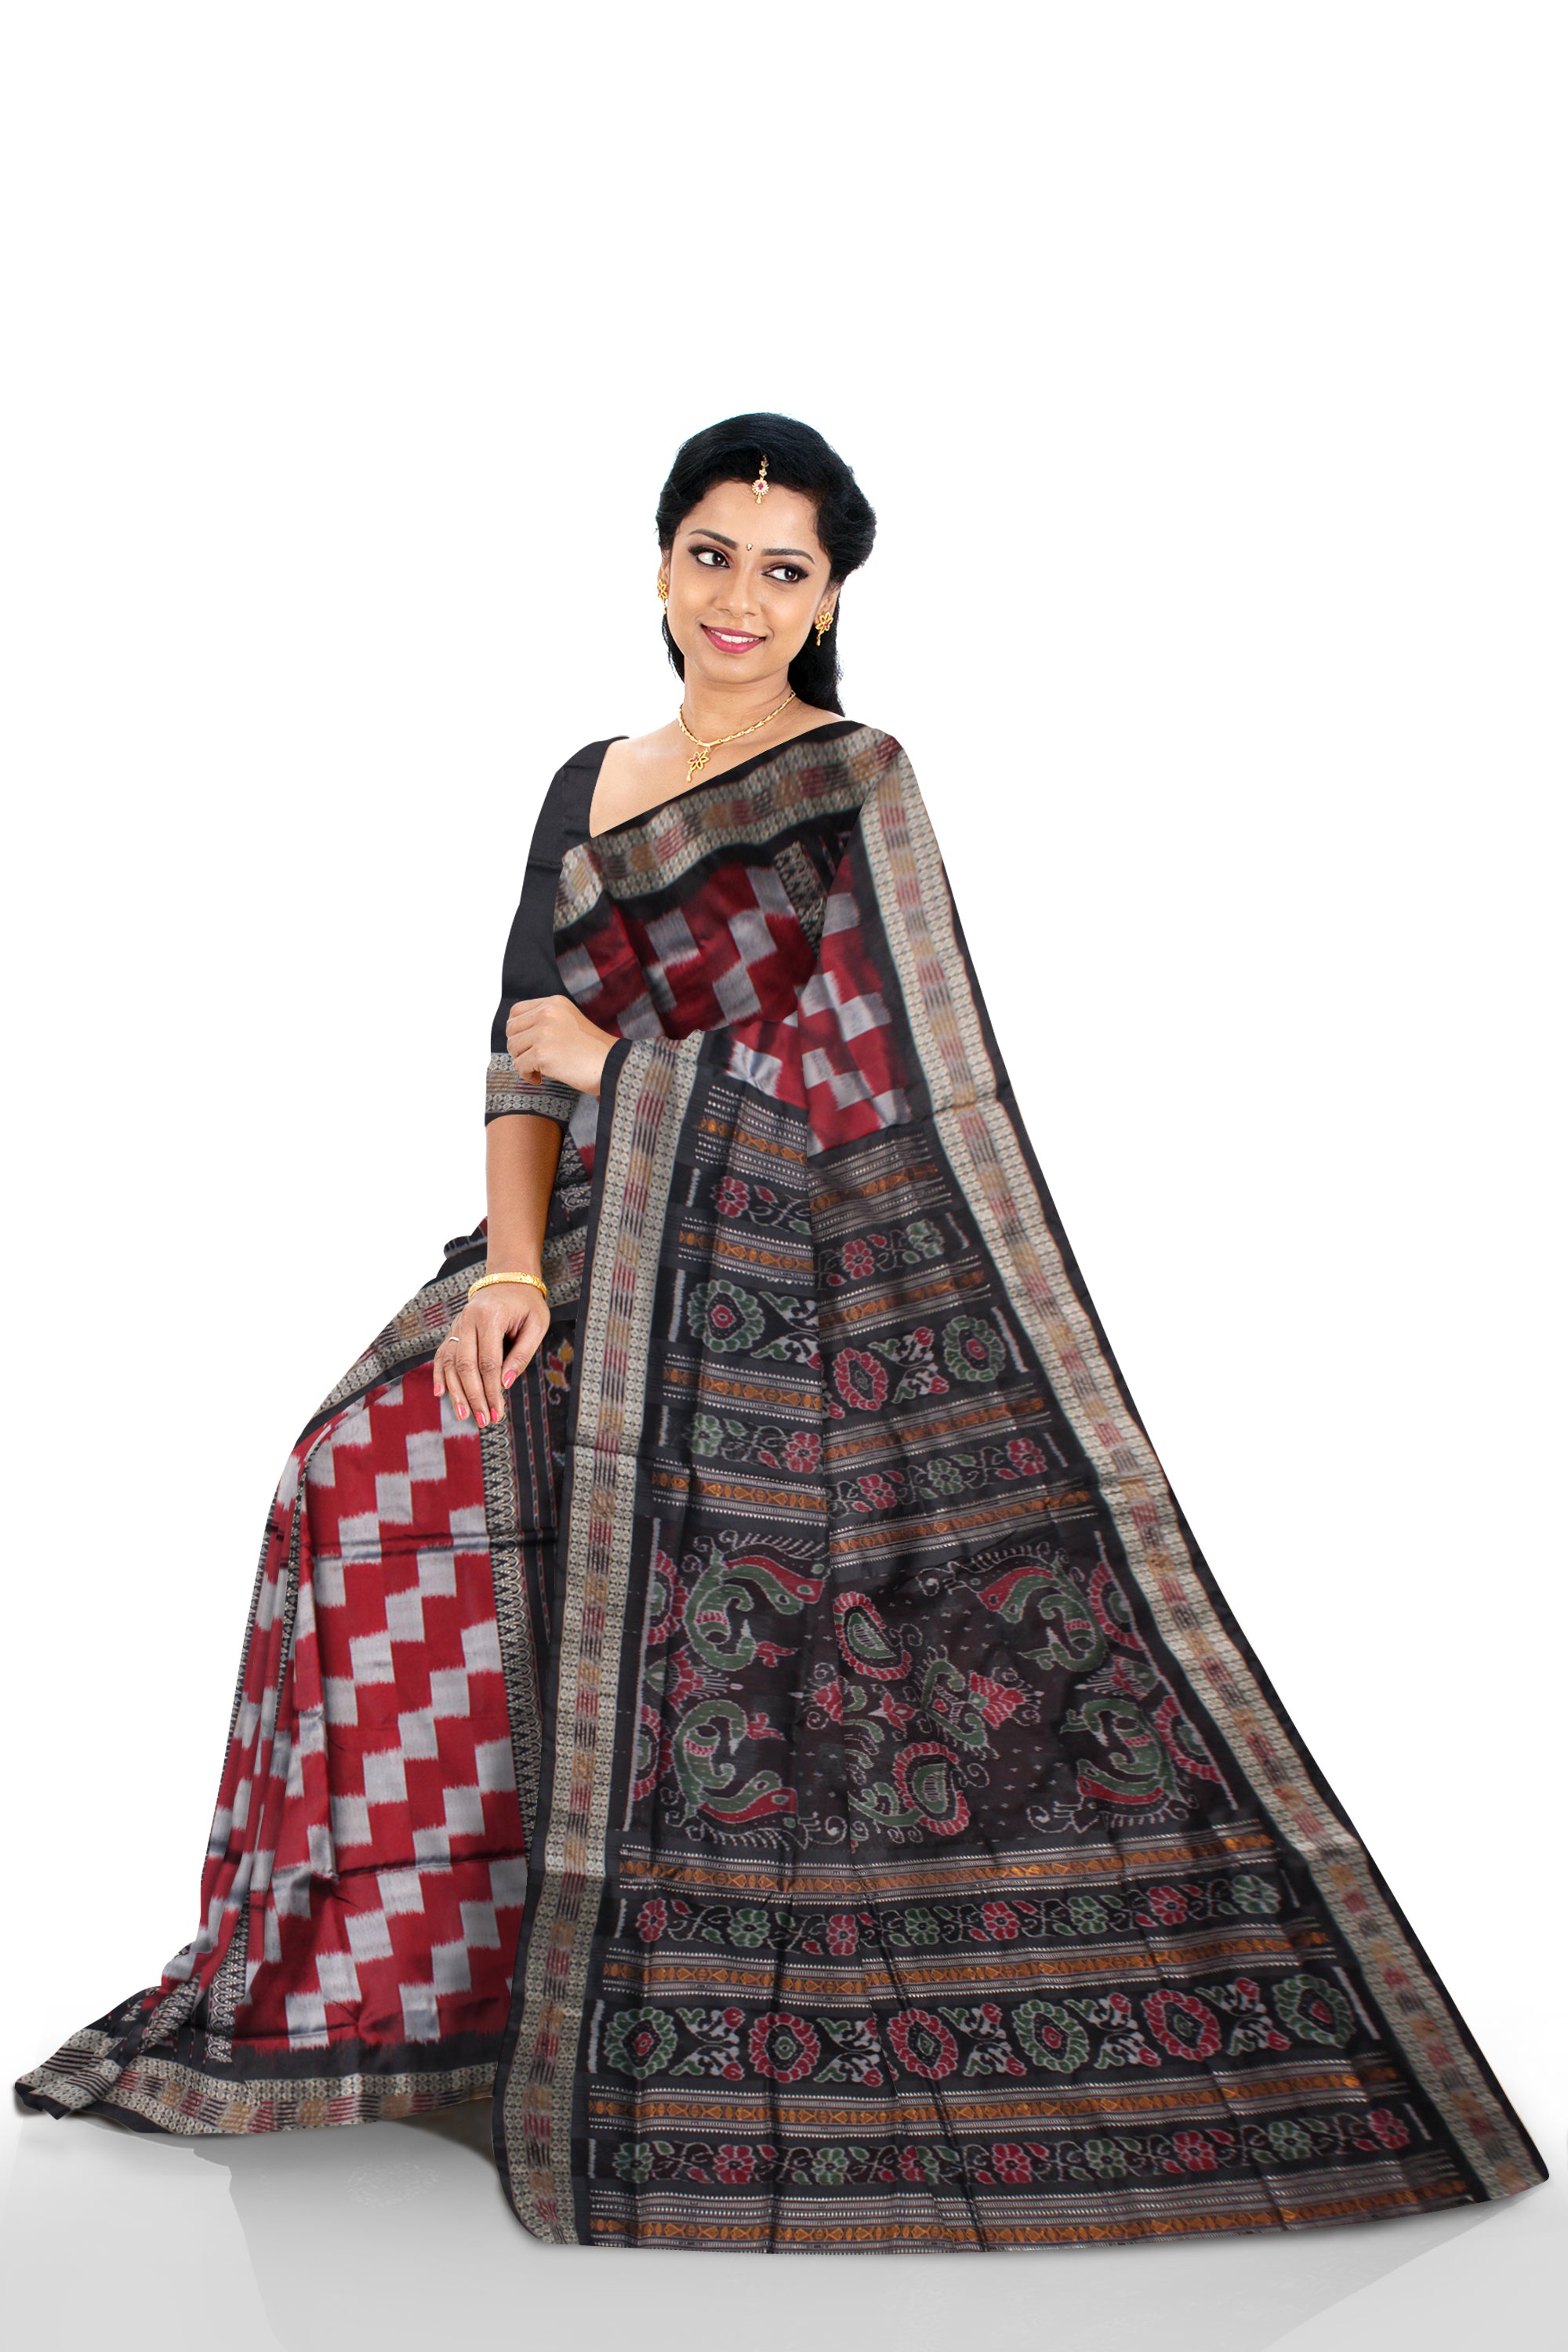 NEW TRADITIONAL LOOK PERE PERE BANDHA WITH BOMKEI PATTERN SAREE WITH BLACK COLOR BLOUSE. - Koshali Arts & Crafts Enterprise